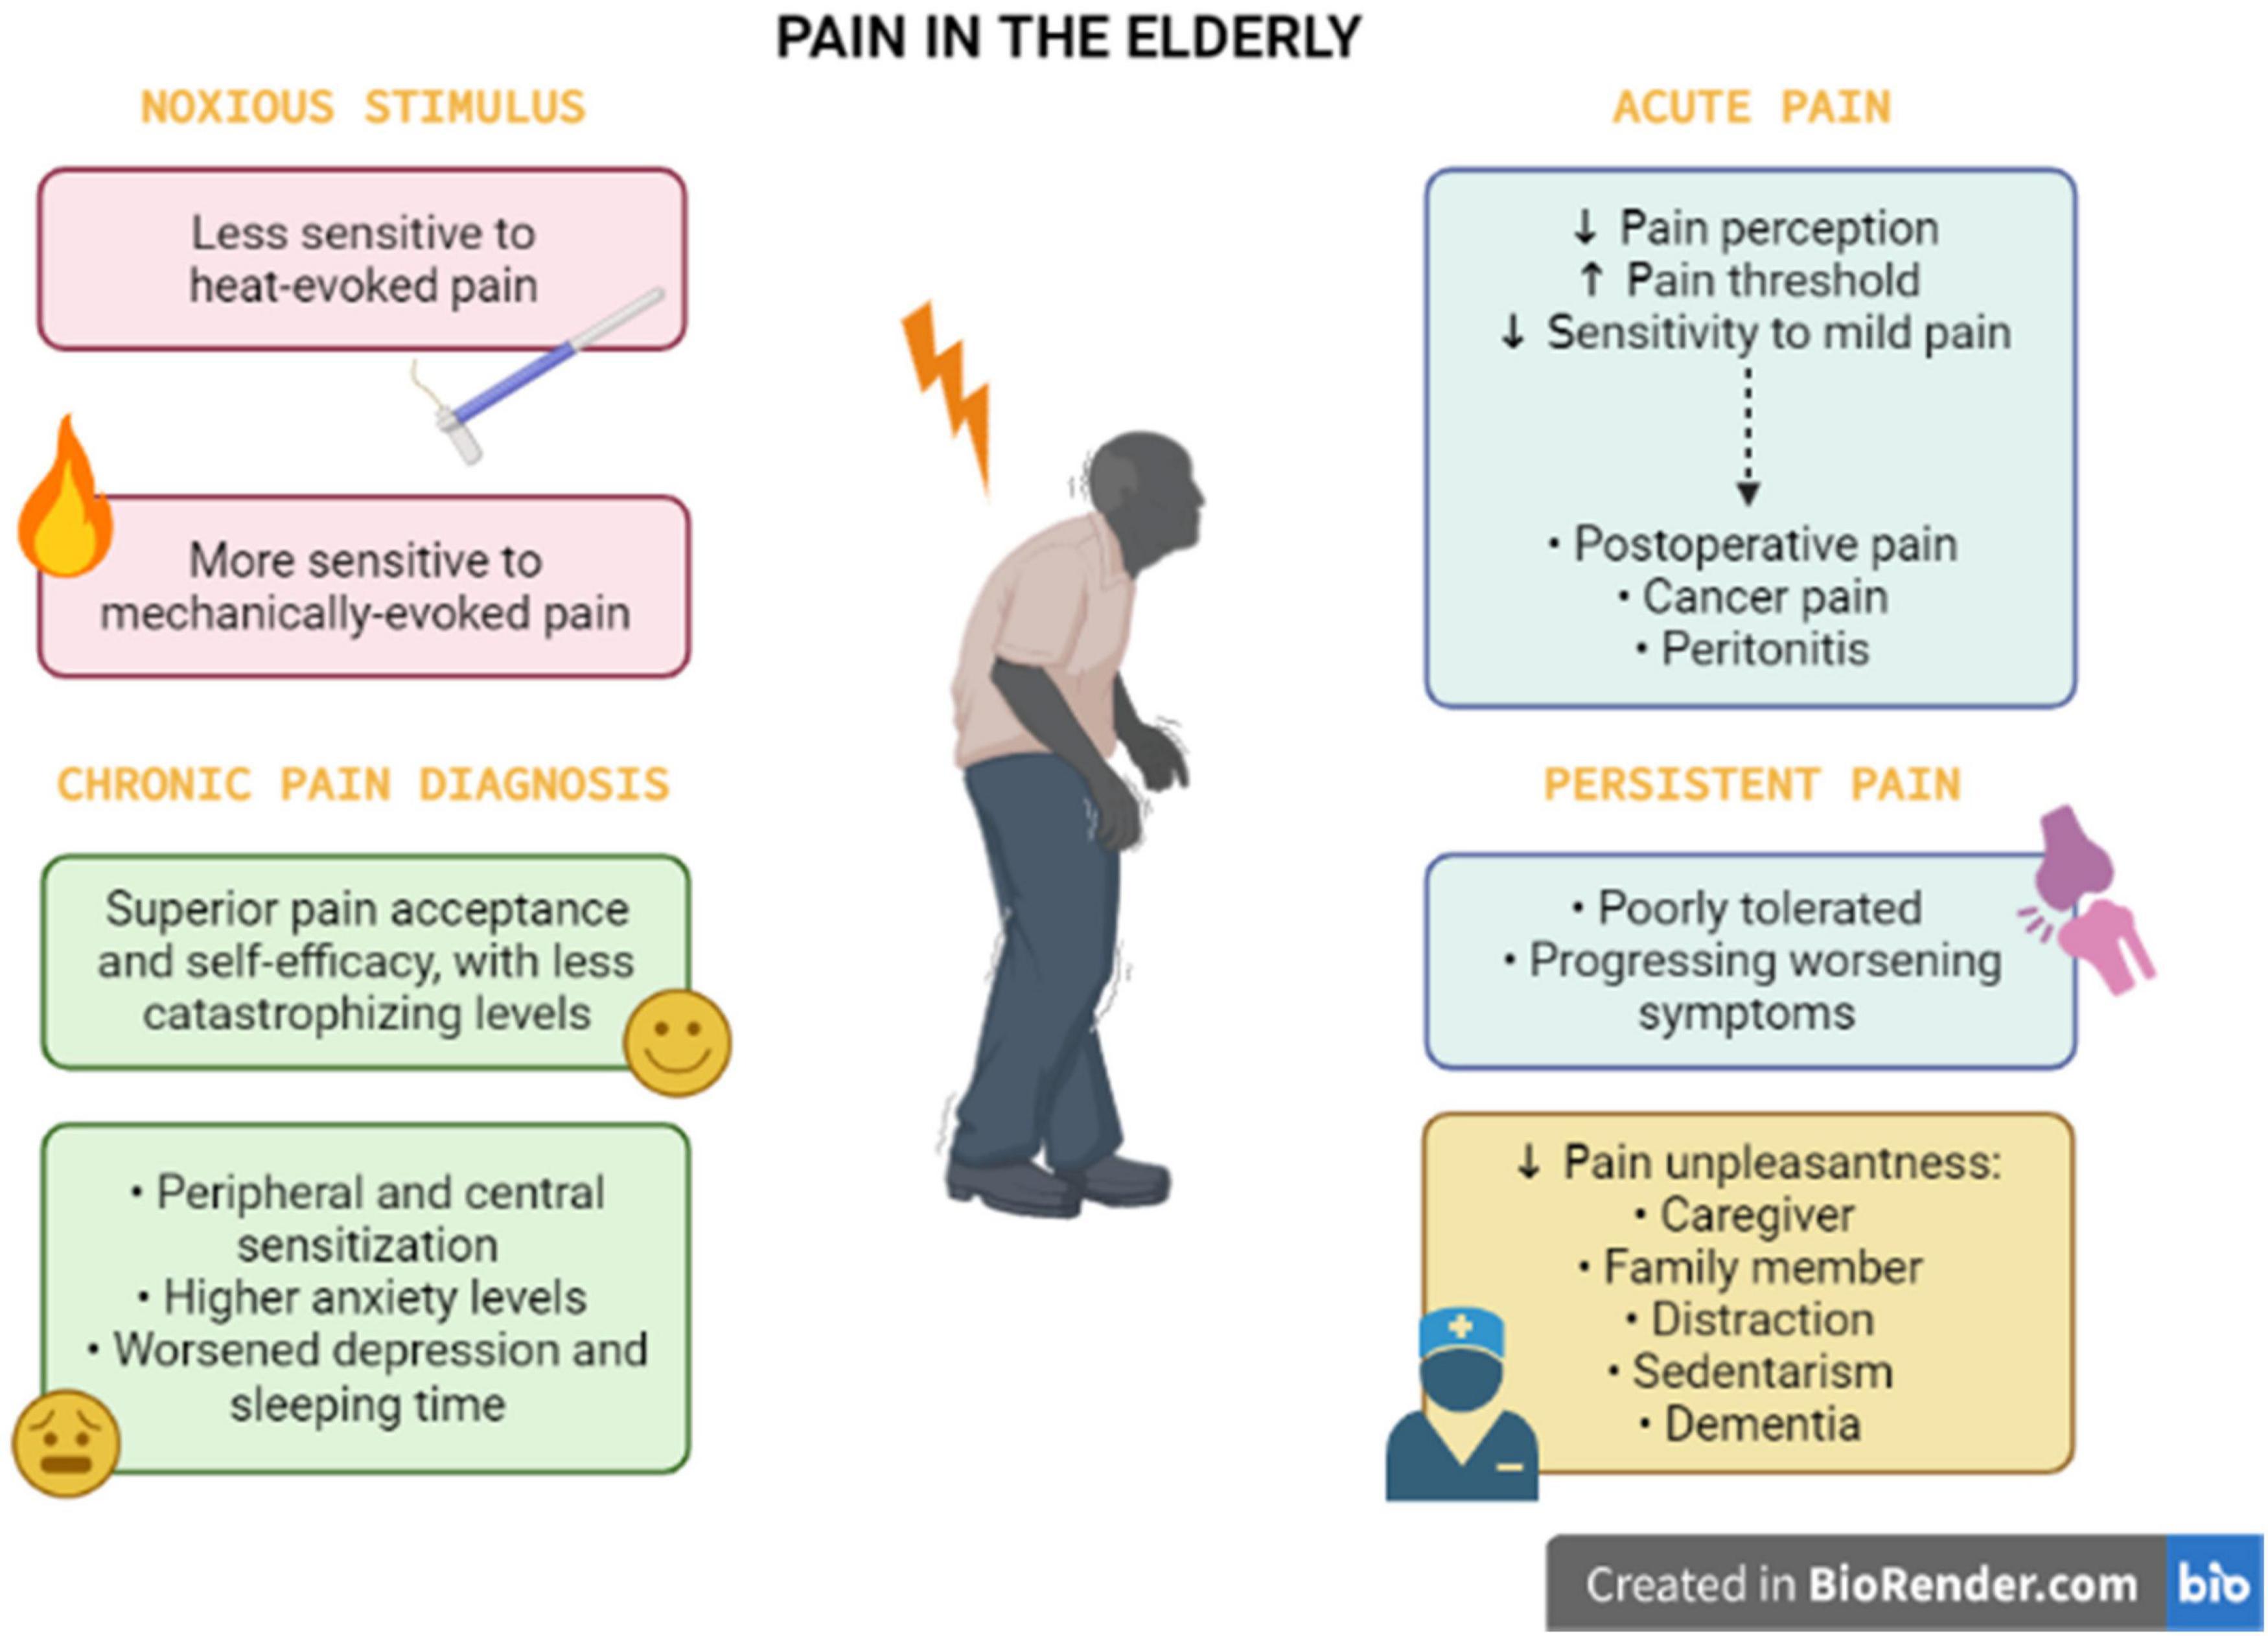 Frontiers | Chronic Pain in the Elderly: Mechanisms and Perspectives